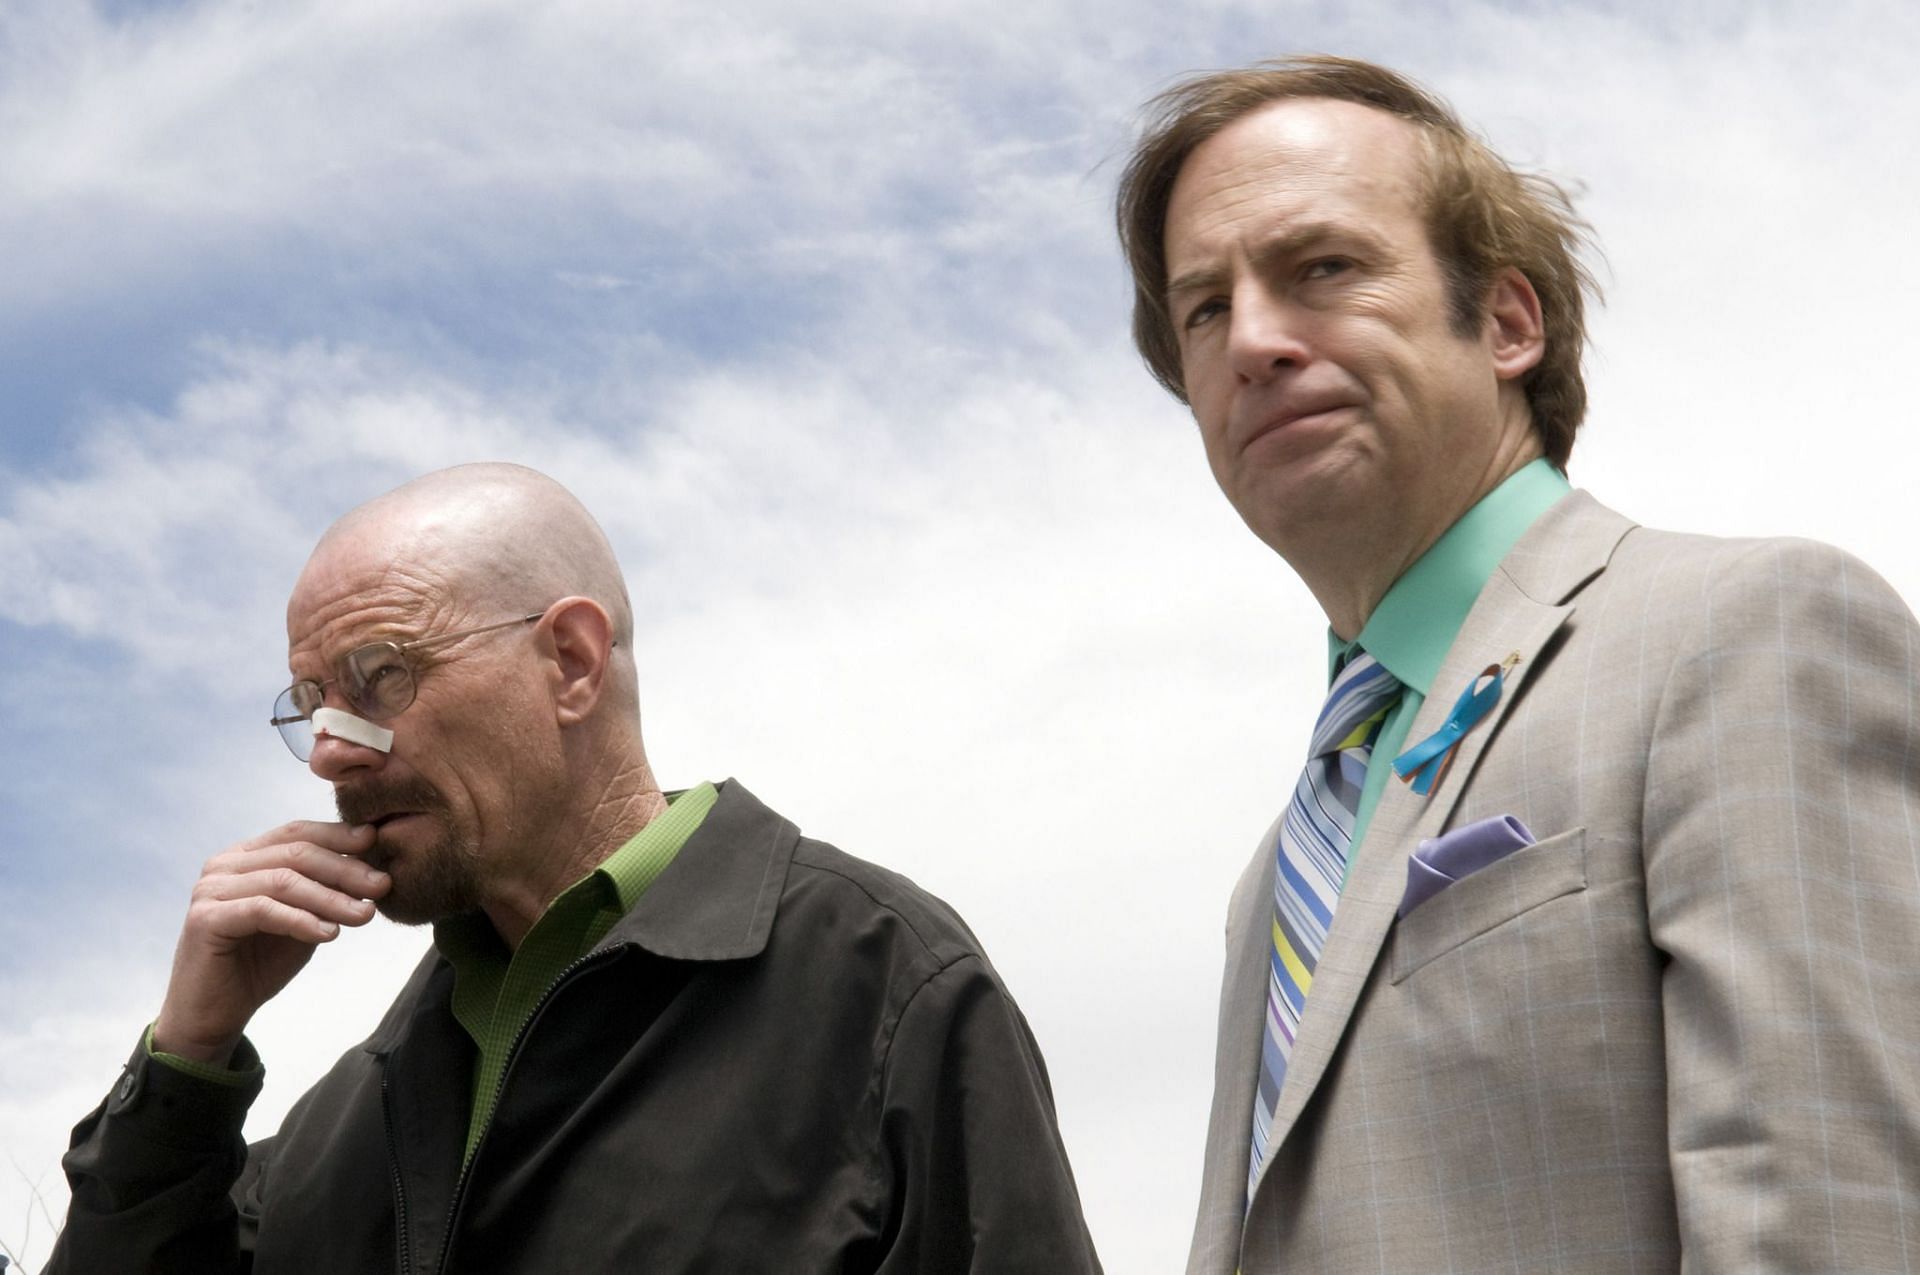 A still of Walter White and Saul Goodman from Breaking Bad (Image via IMDb)